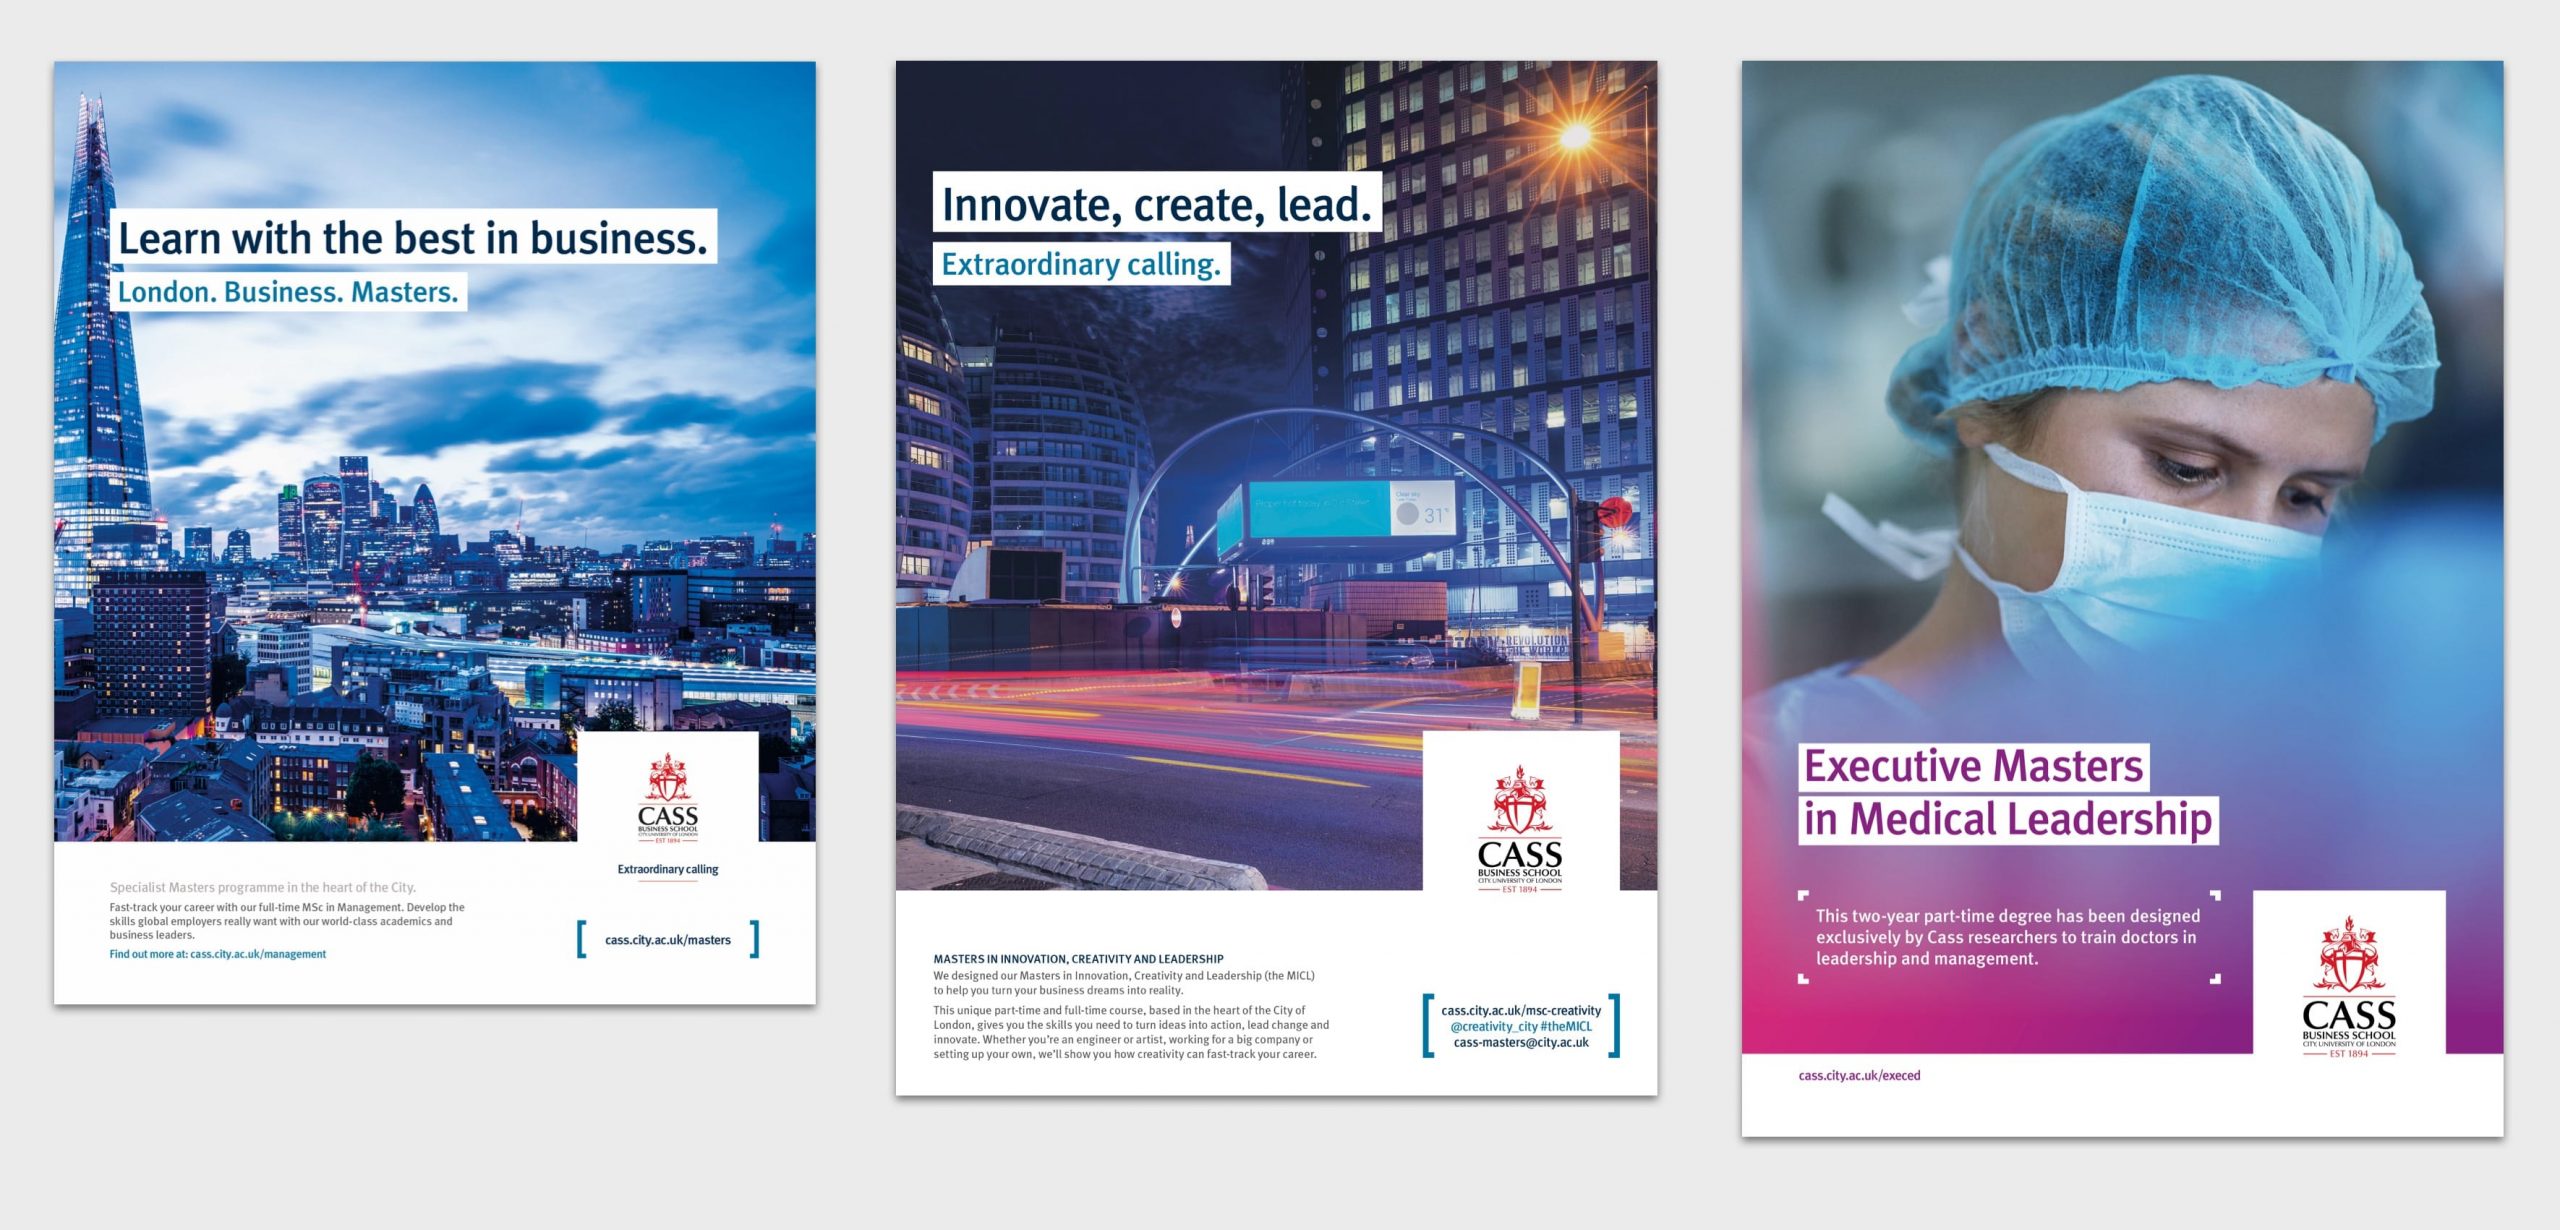 Cass Business School, aadverts: London skyline, 'Learn with the best in Business', Silicone roundabout at night 'Innovate, create, lead', Surgeon 'Executive Masters in Medical Leadership'